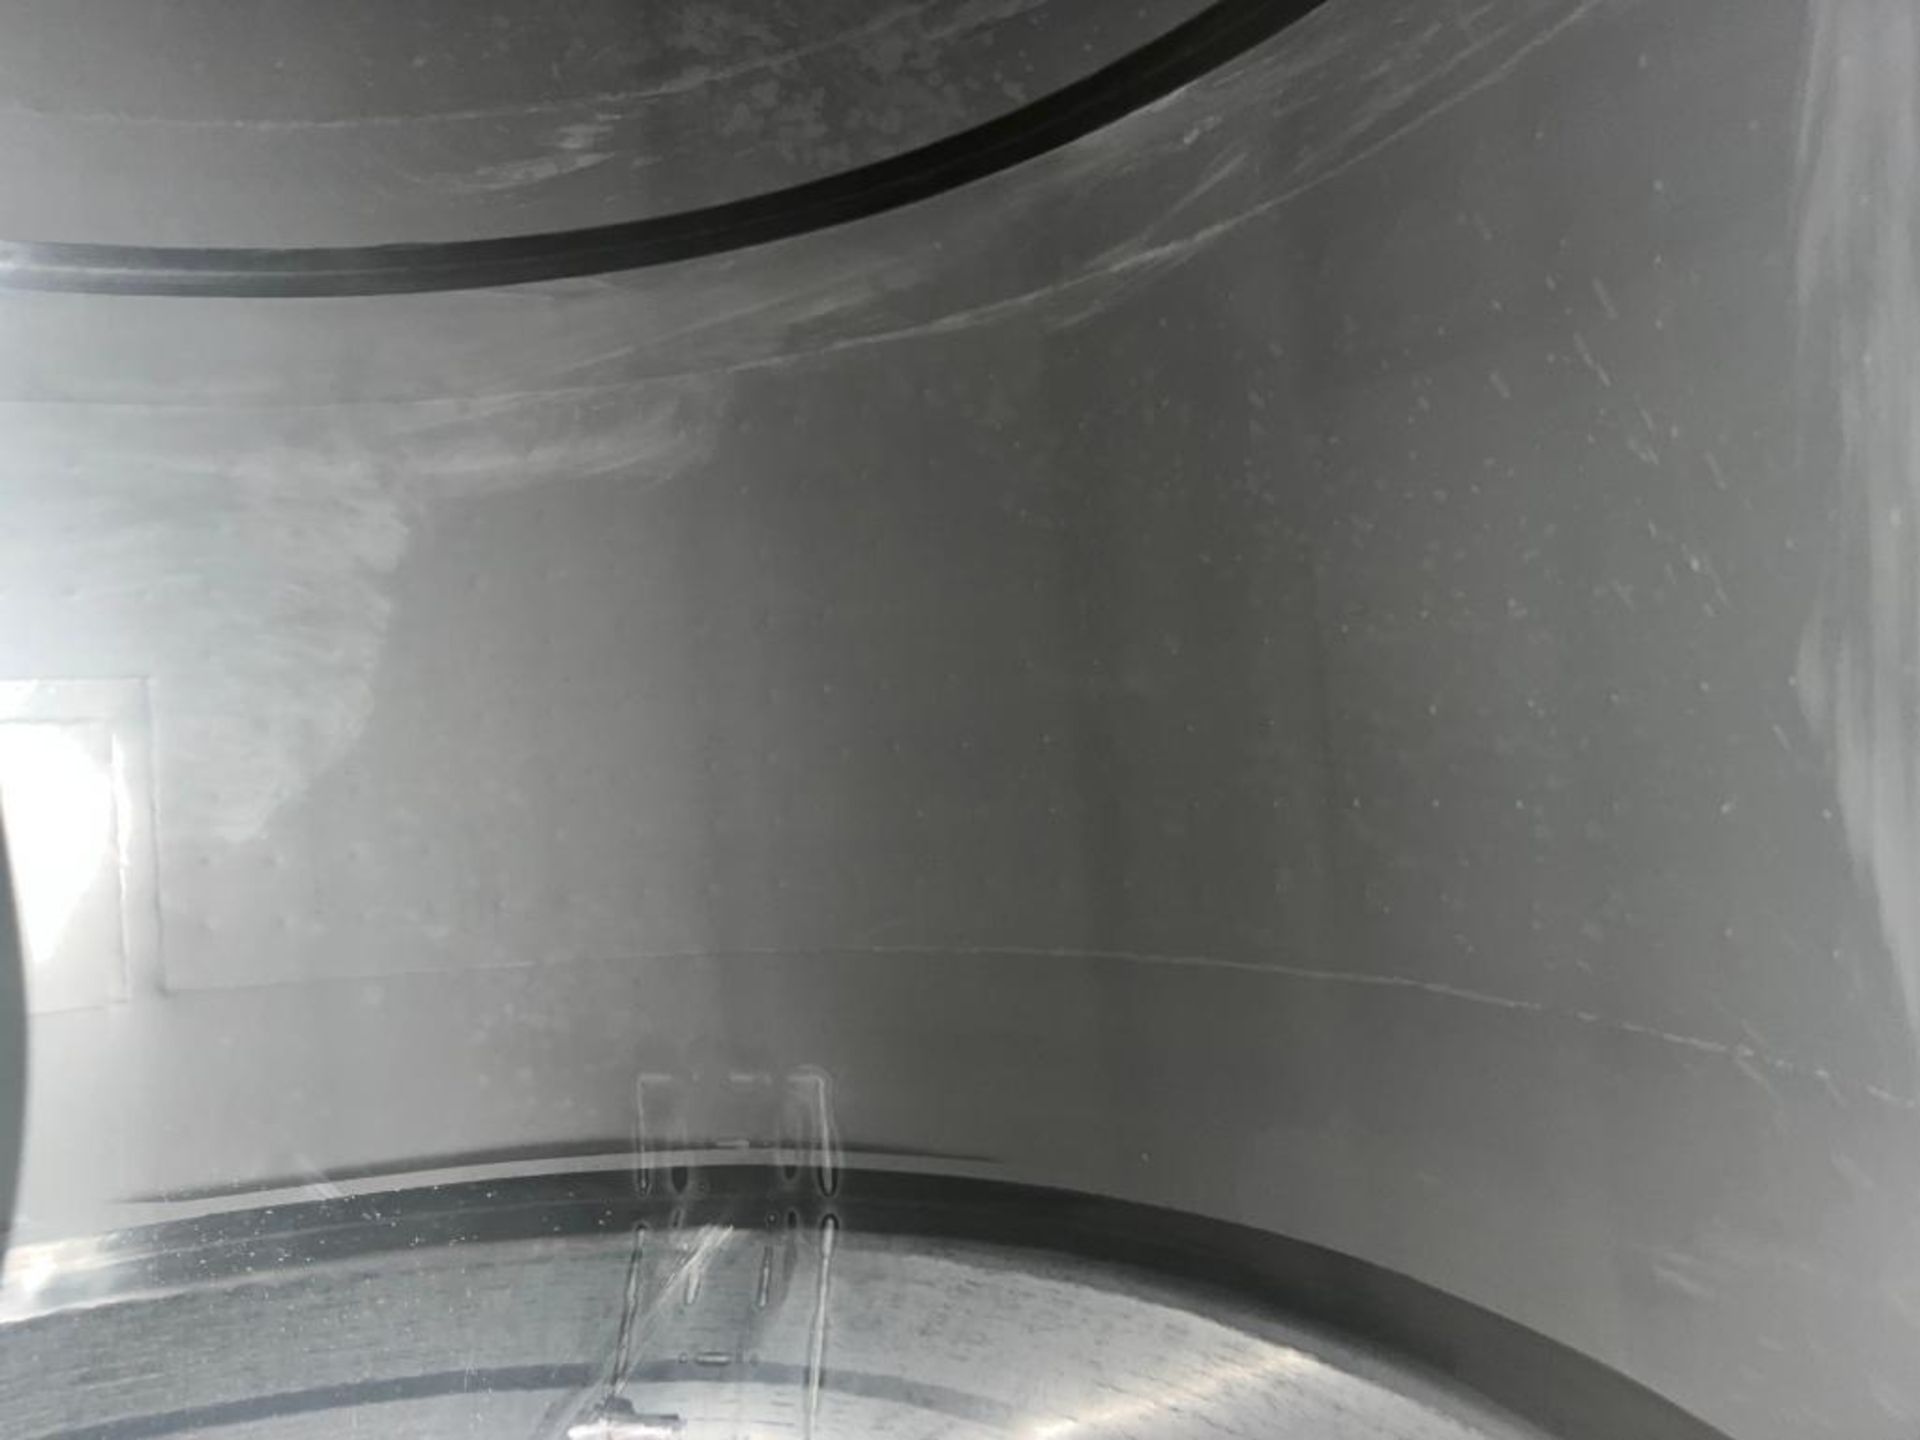 Shenzhen Jacketed Fermenter Tank, 60BBL (1800 Gallon), 304 Stainless Steel. Dished top coned bottom. - Image 10 of 11